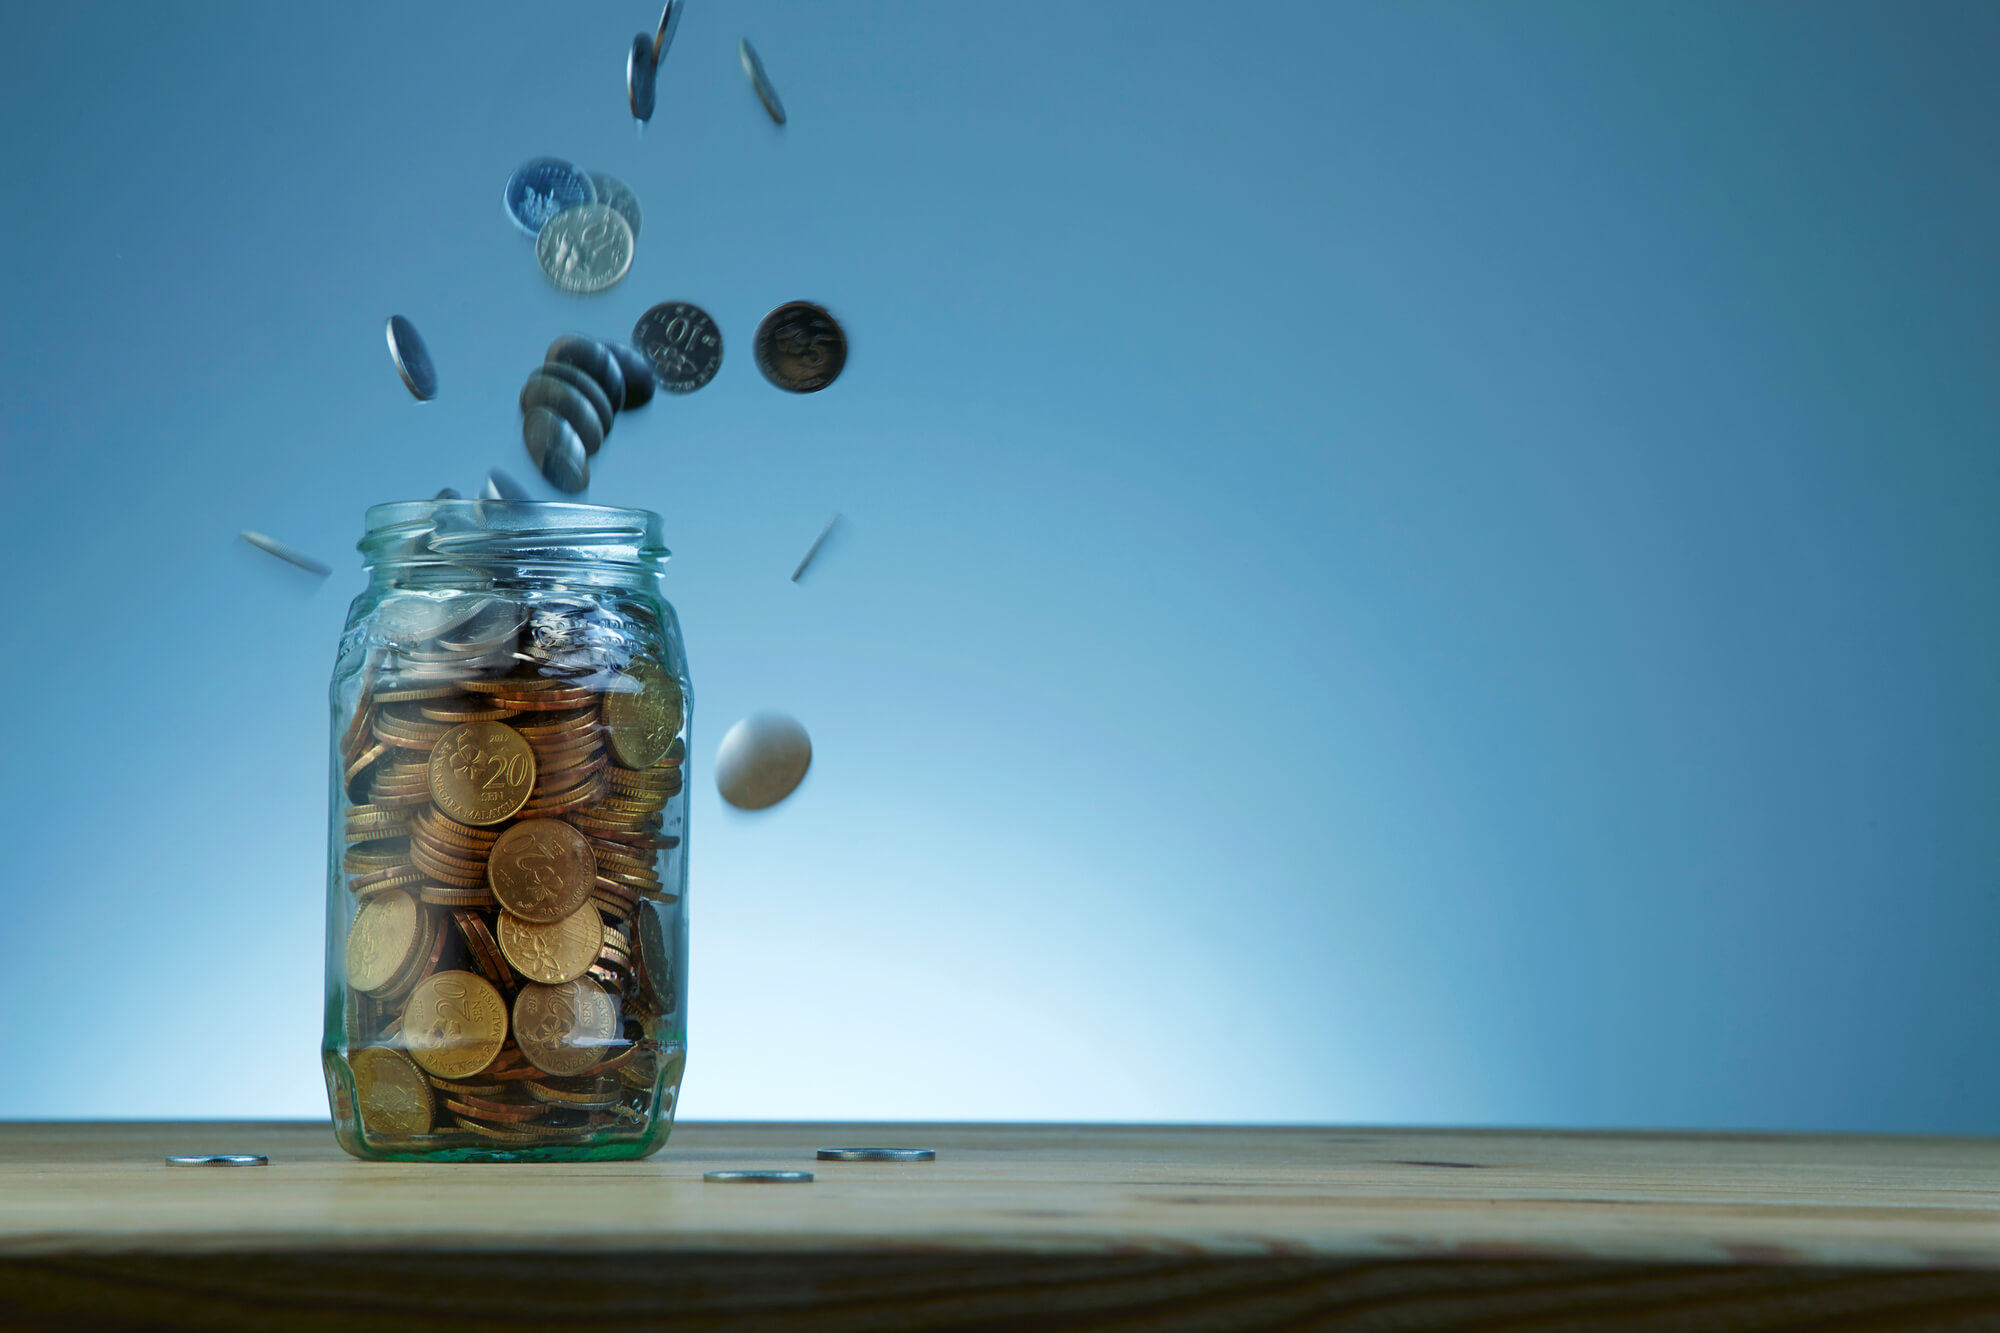 Coins falling into a glass jar with blue gradient background